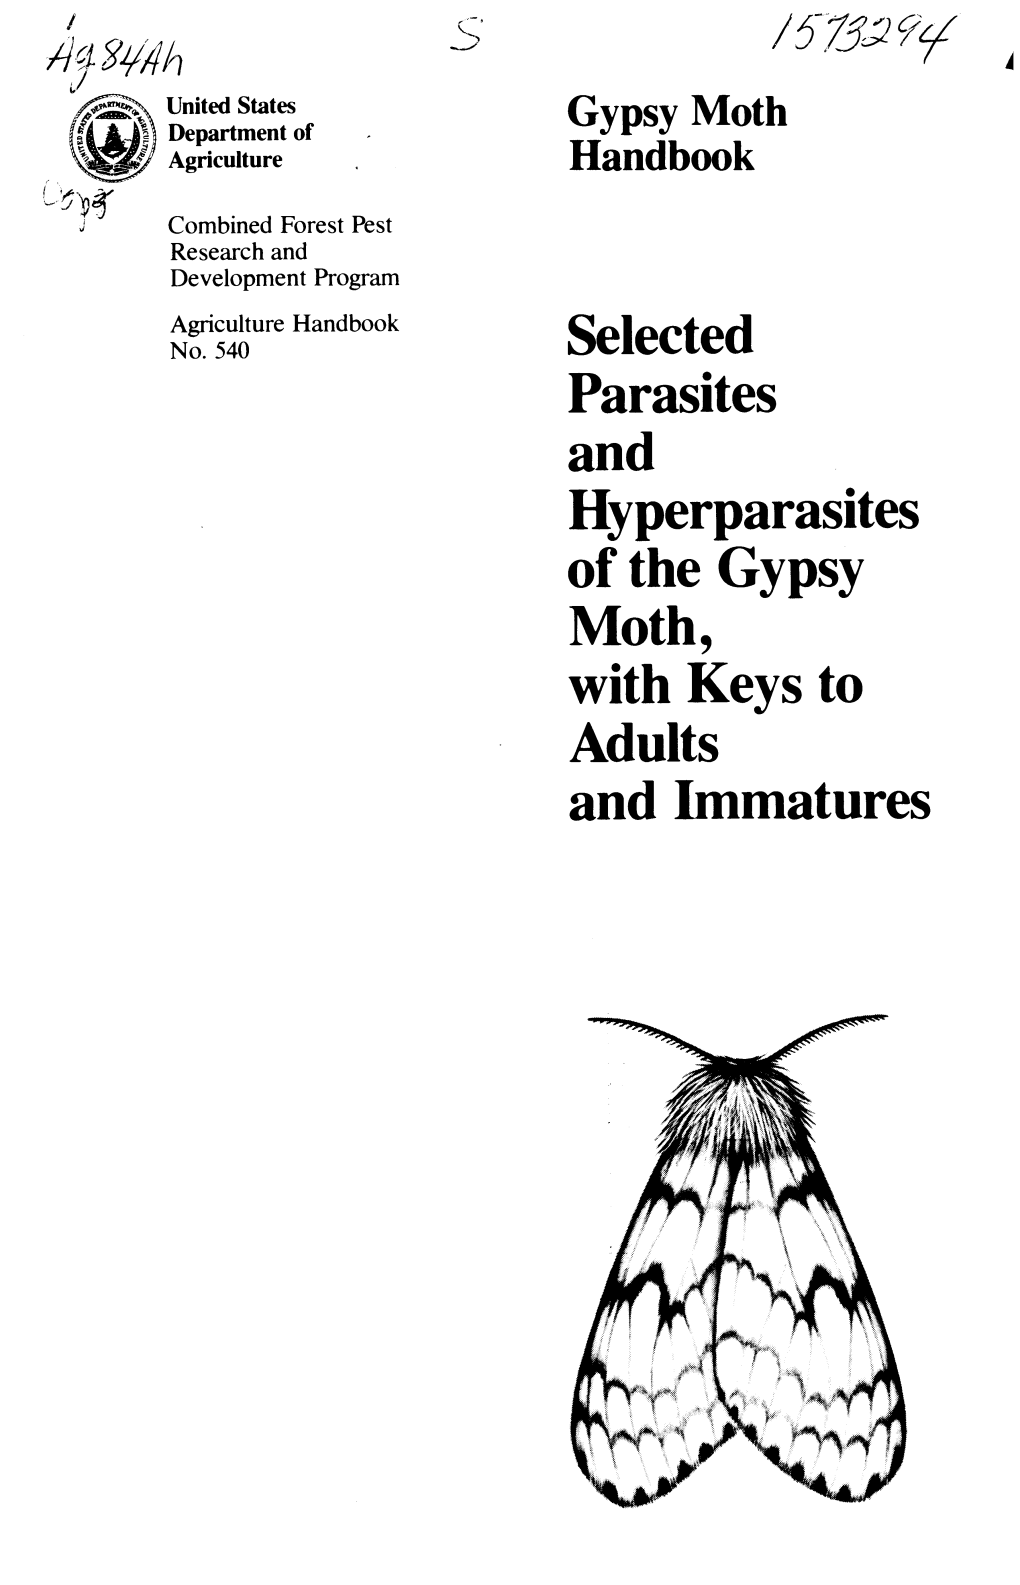 Selected Parasites and Hyperparasites of the Gypsy Moth, with Keys to Adults and Immatures in 1974 the US